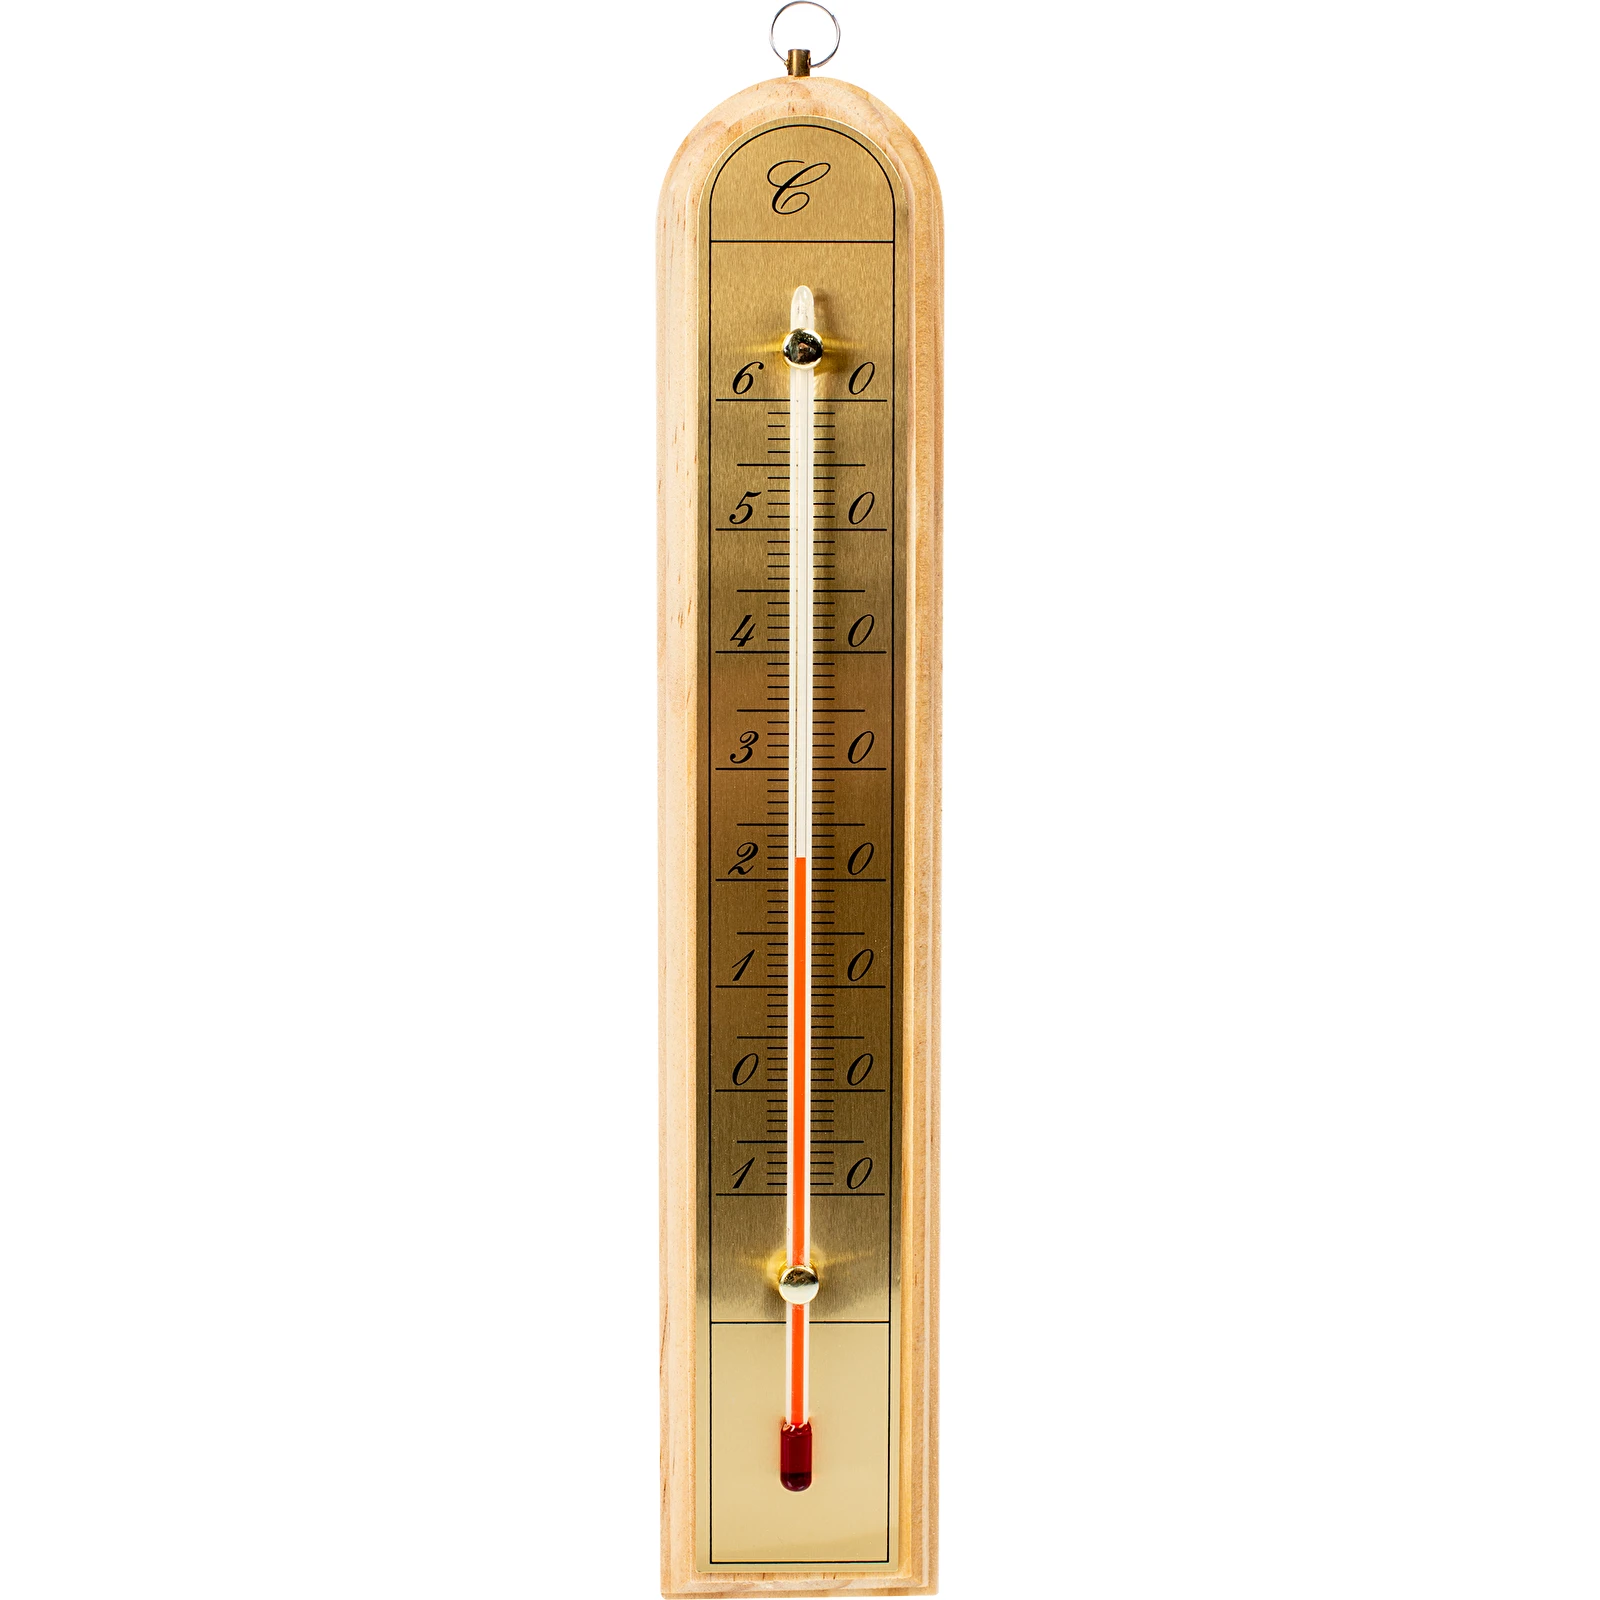 Indoor thermometer with a golden scale, from -10 to +60°C symbol